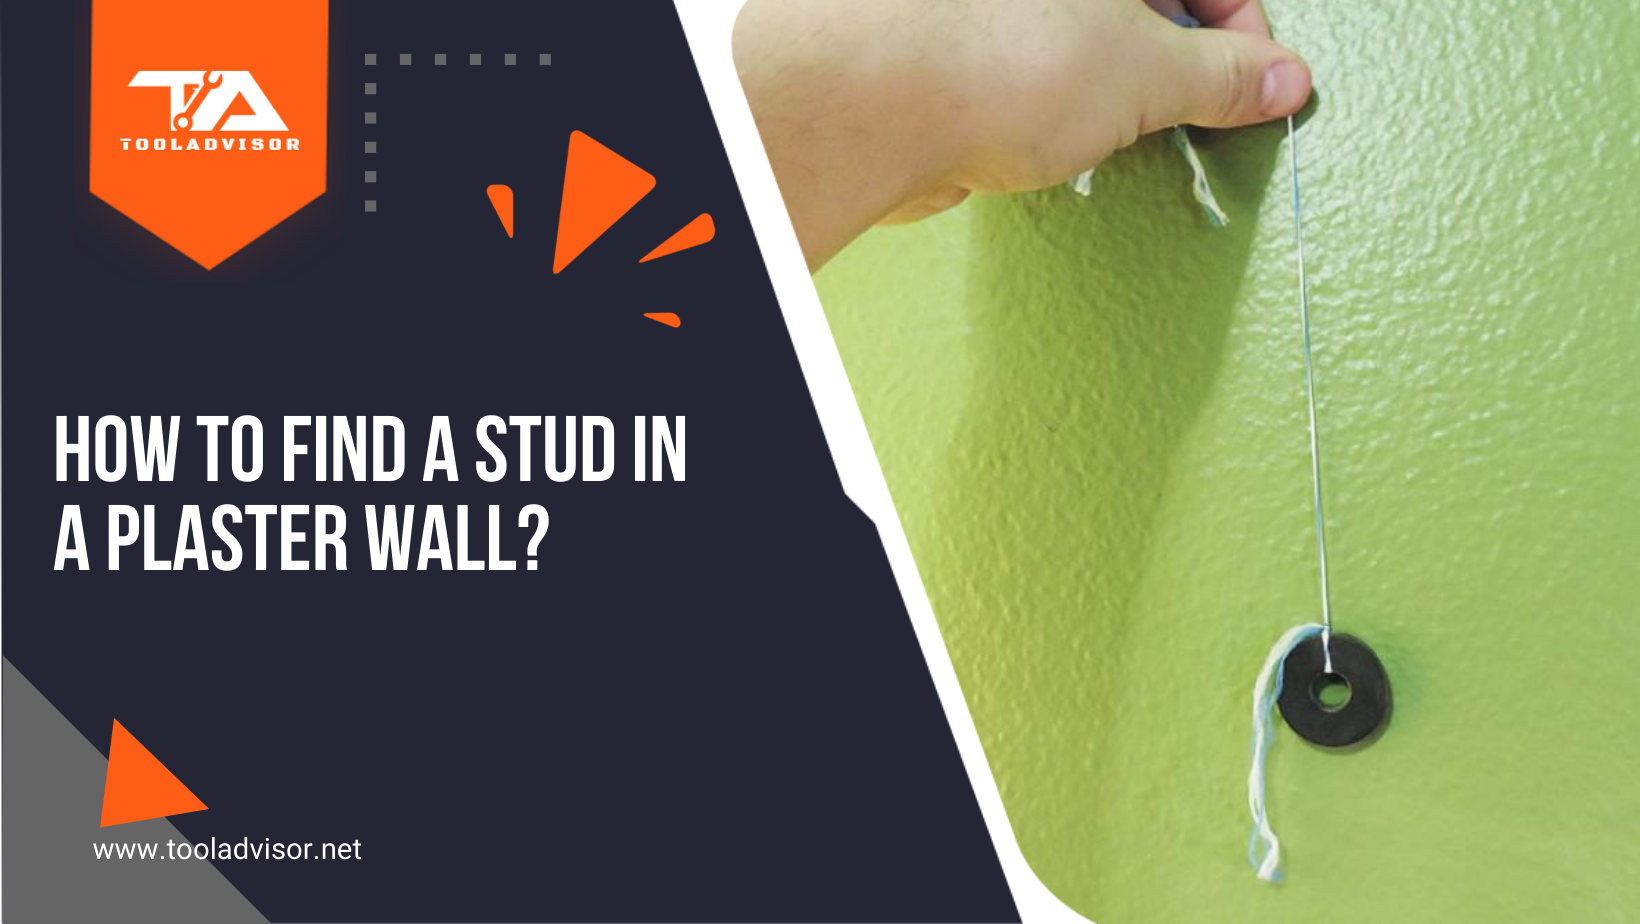 How to Find a Stud In a Plaster Wall